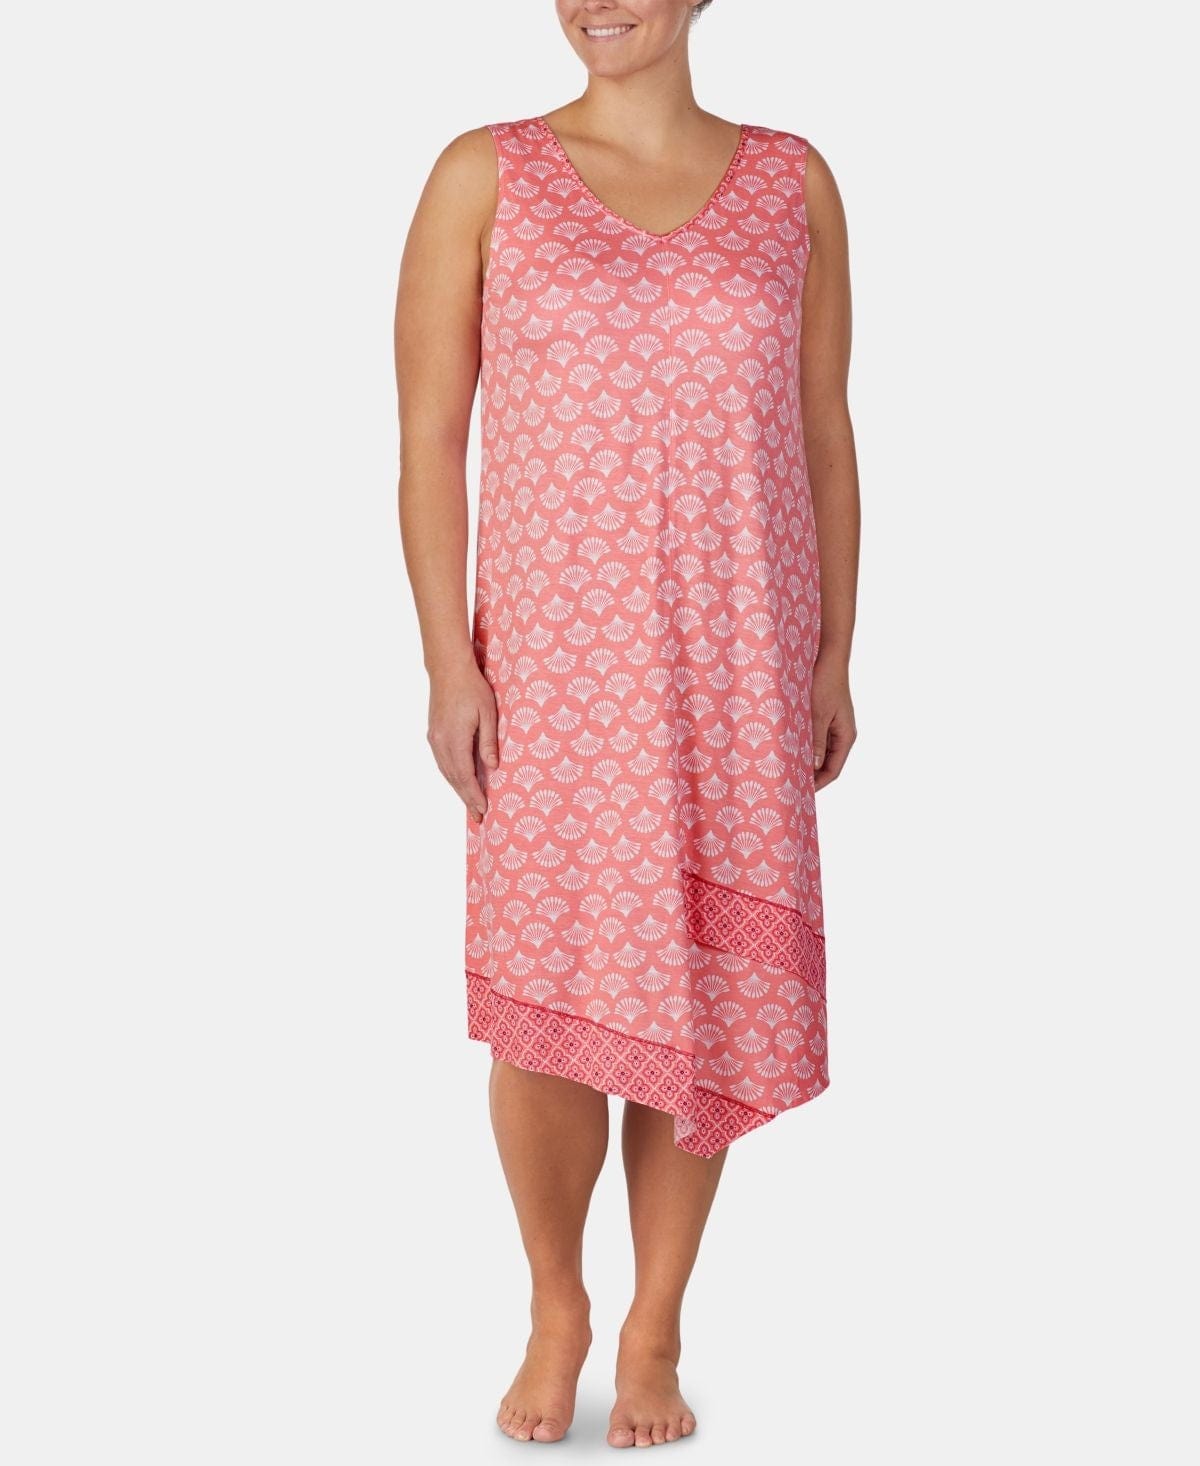 Ellen tracy Womens Tops XL / Pink Printed Nightgown